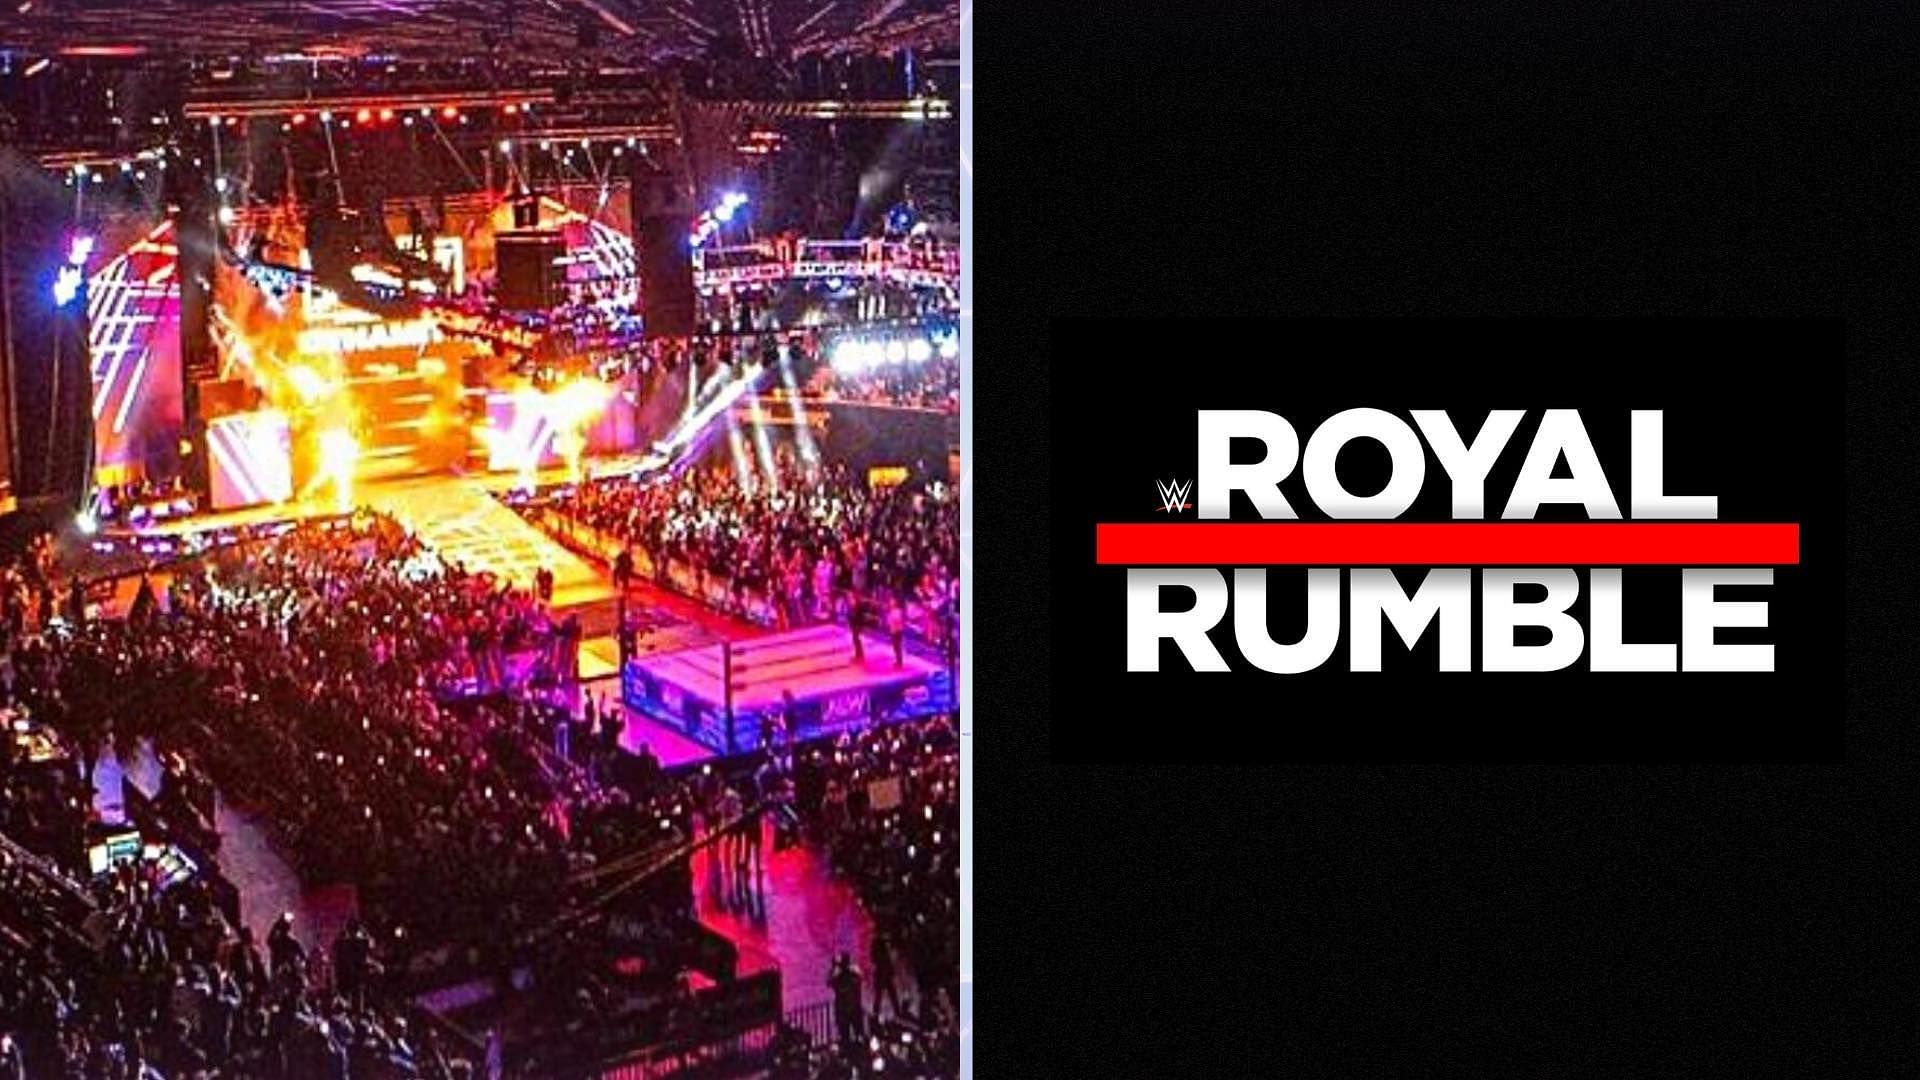 A former AEW star appeared in the Royal Rumble match